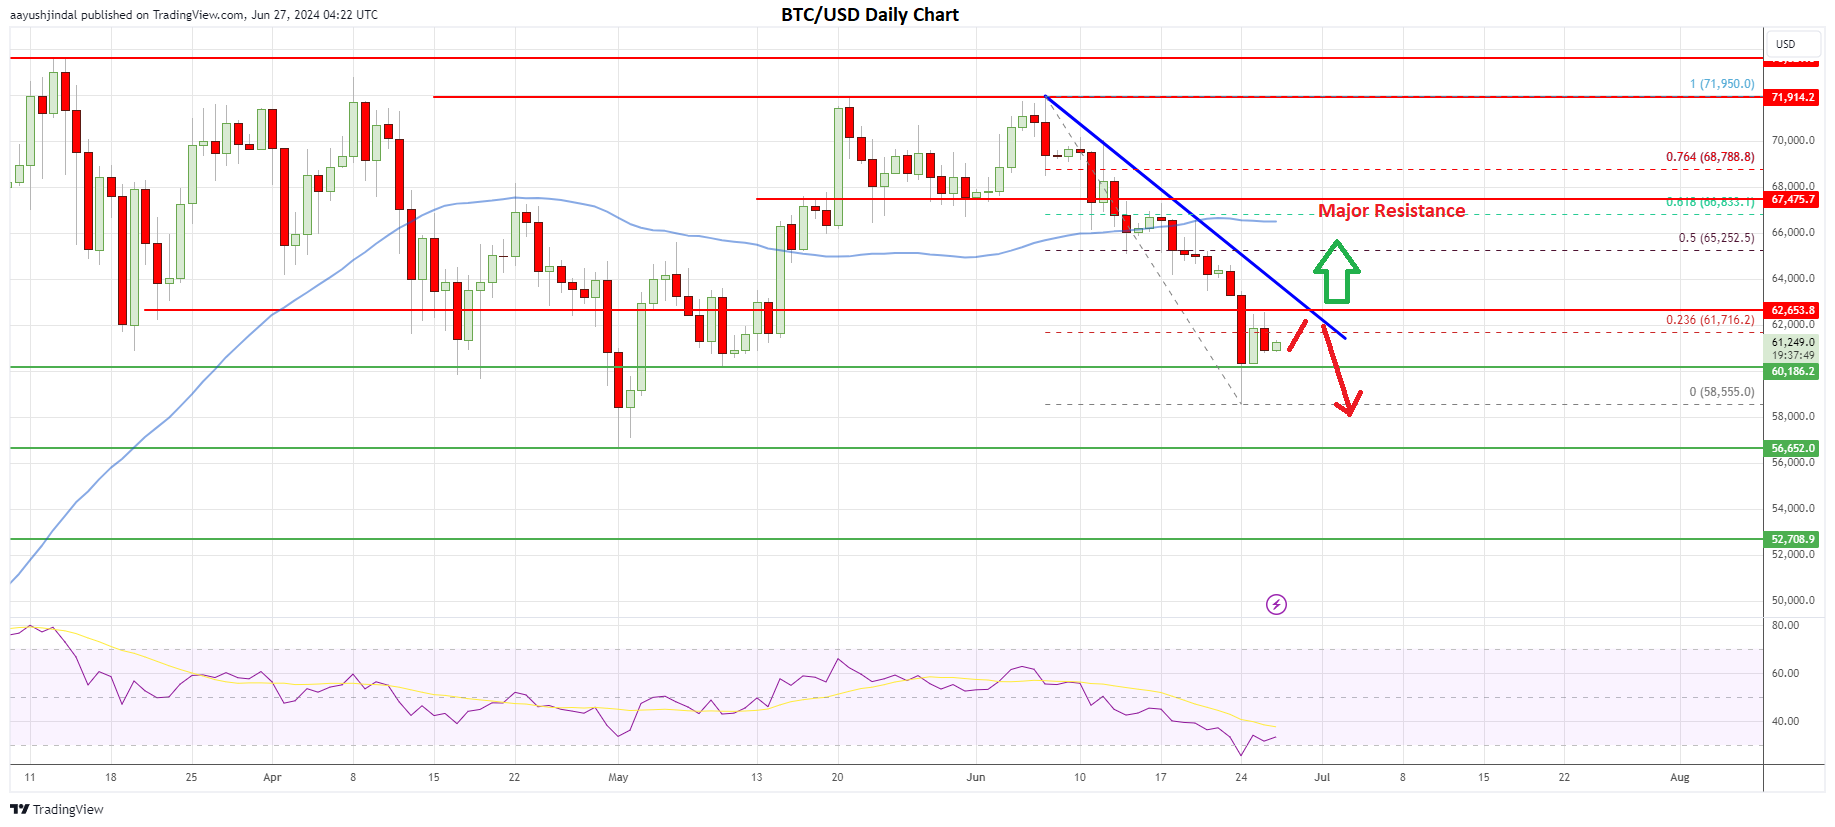 Bitcoin Bears Unrelenting: Analyzing The Continued Pressure